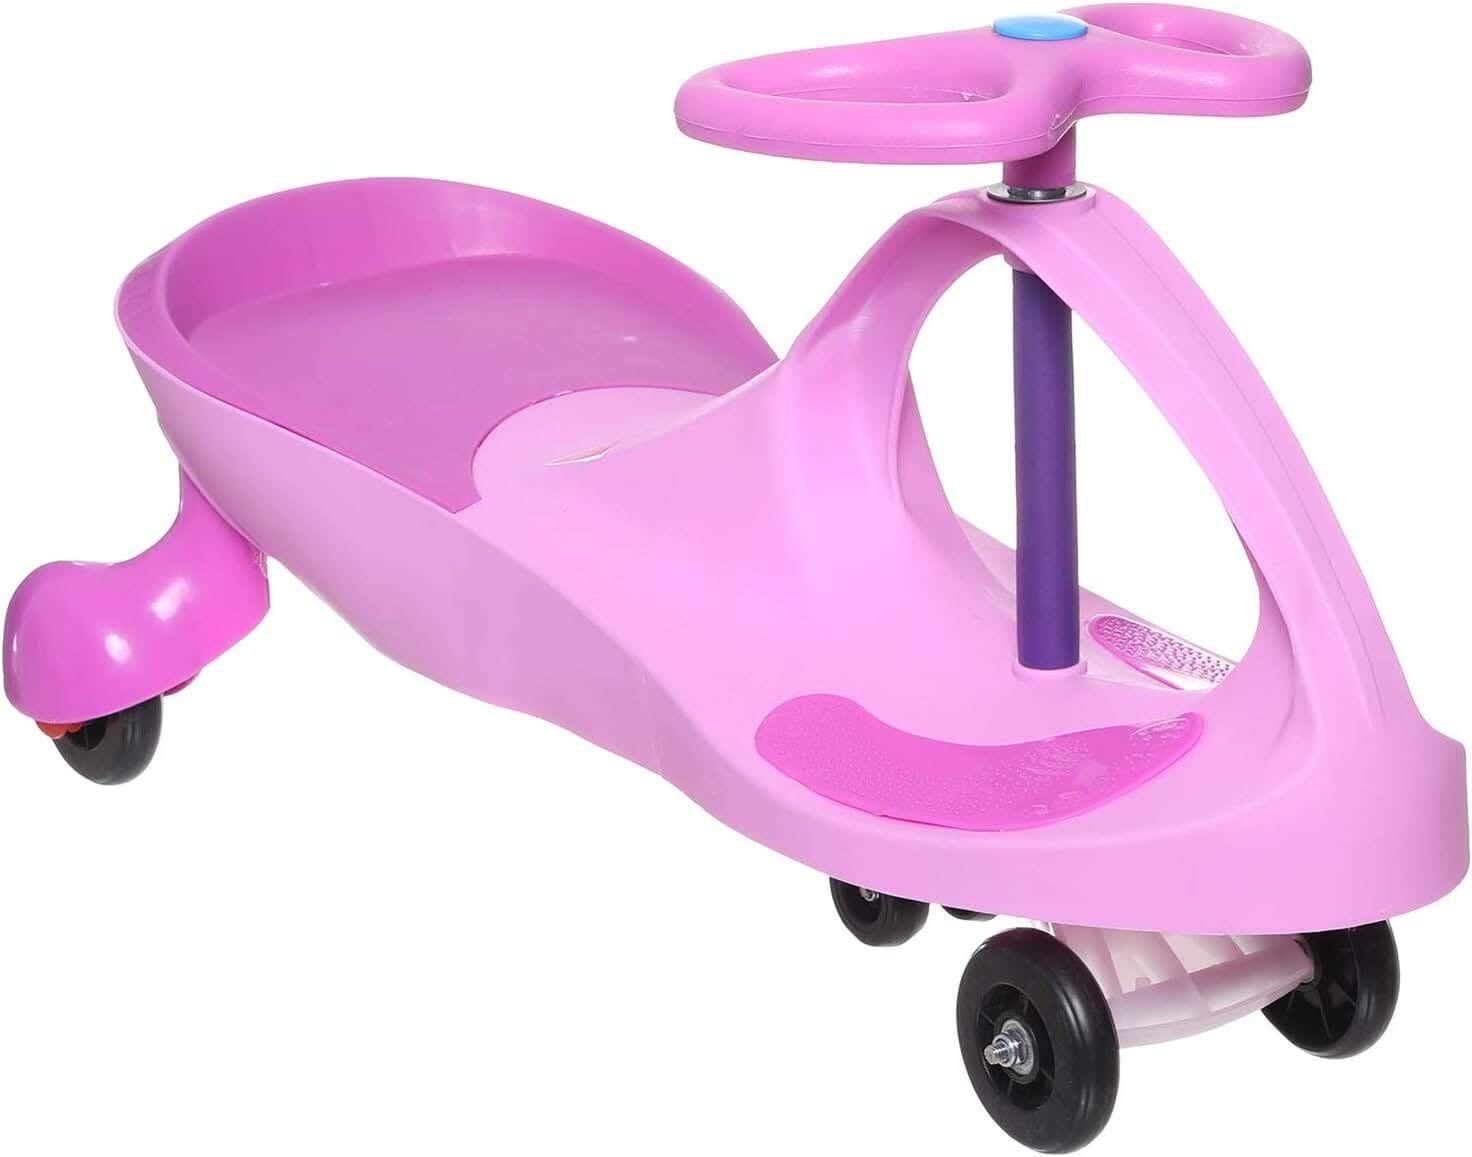 Get Plasma Car For Children, Comfortable Seat, Suitable For Two Years Of Age And Above - Pink with best offers | Raneen.com